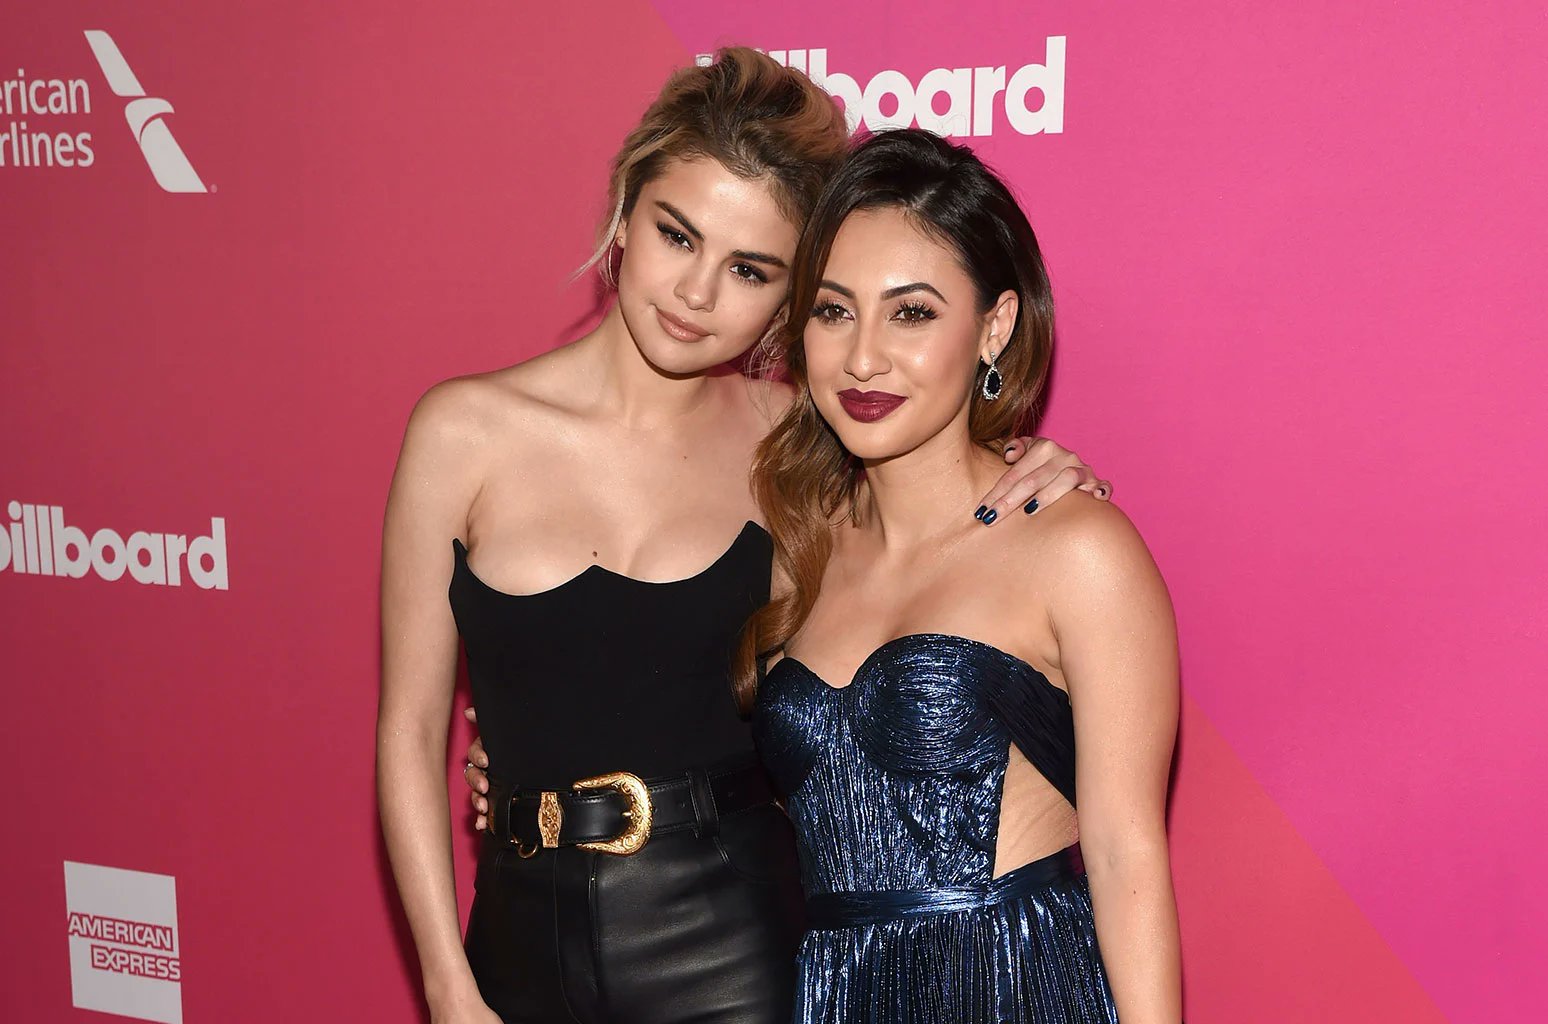 Are Selena Gomez and Francia Raisa still friends? A look at their friendship timeline